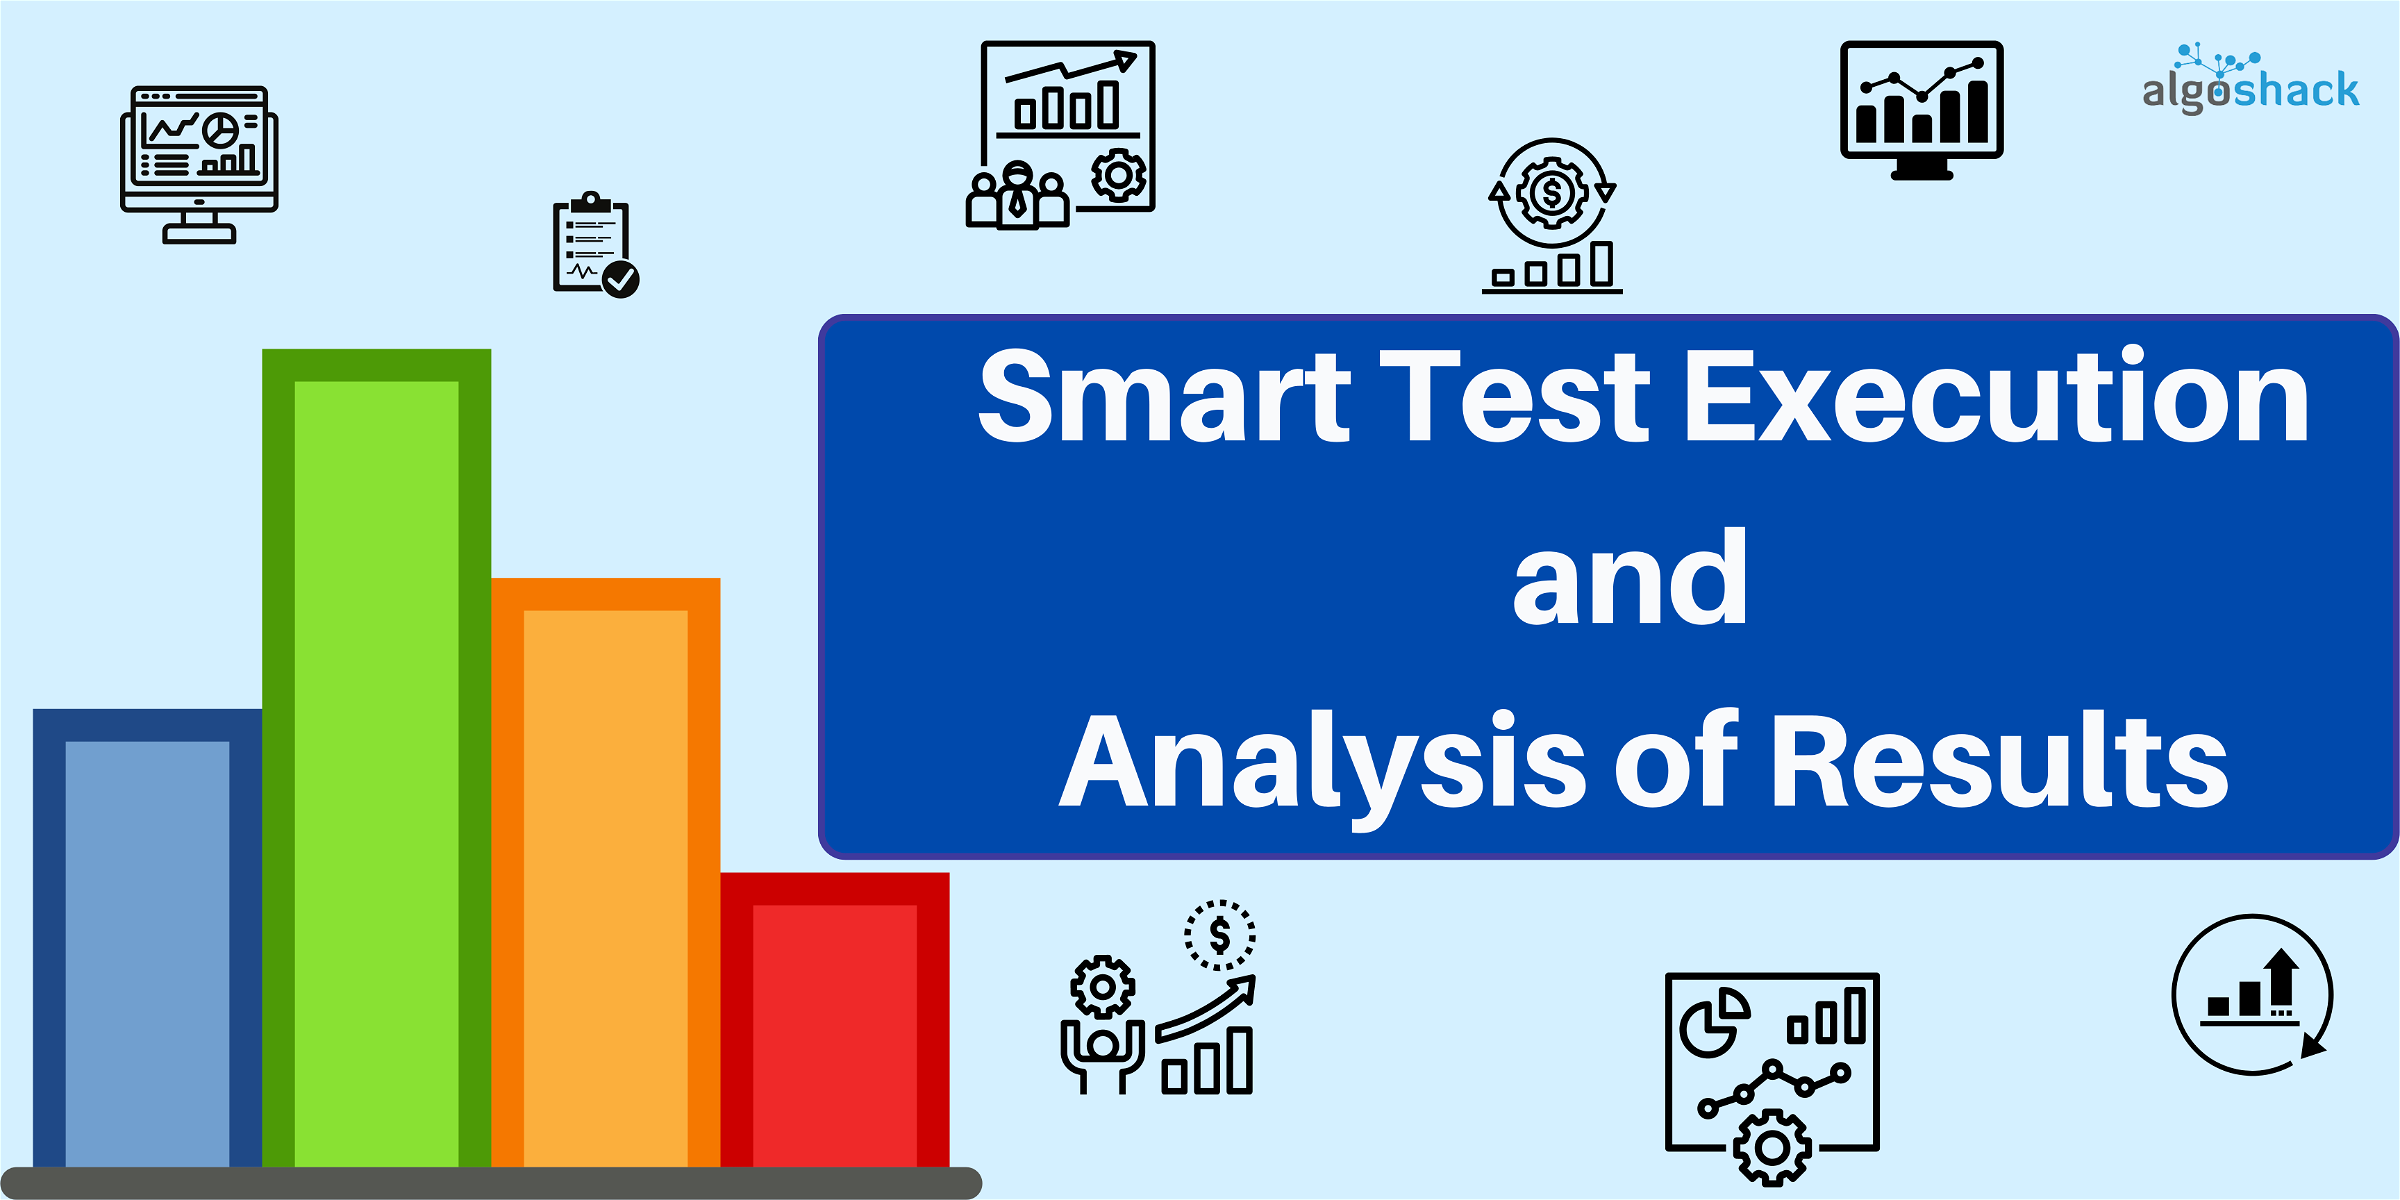 Smart test execution and analysis of results